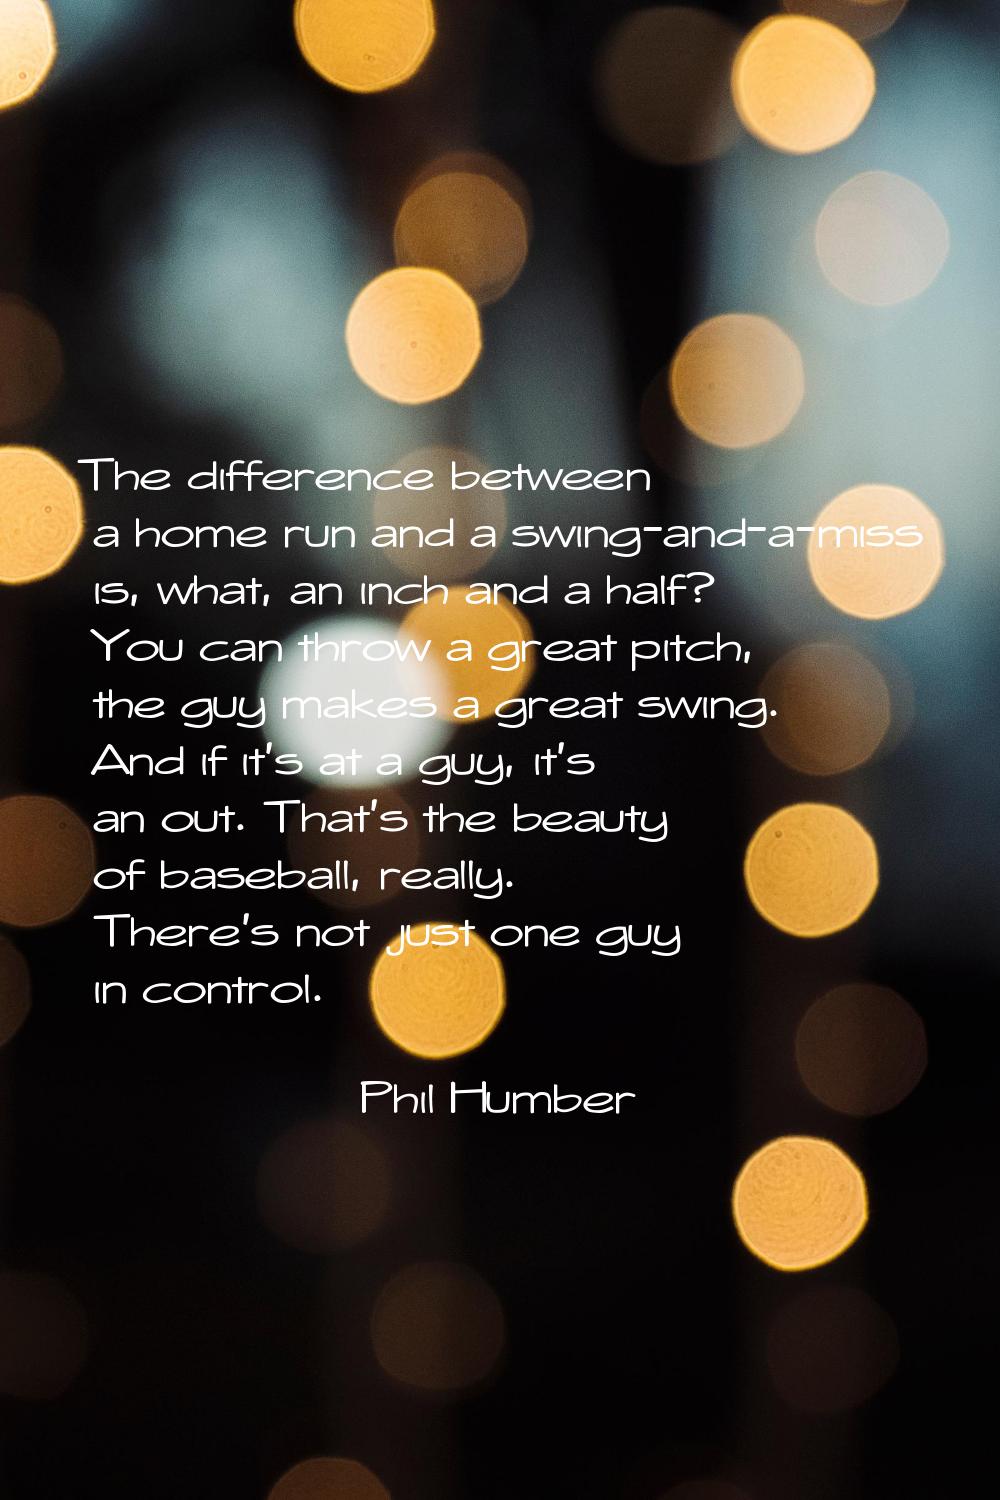 The difference between a home run and a swing-and-a-miss is, what, an inch and a half? You can thro